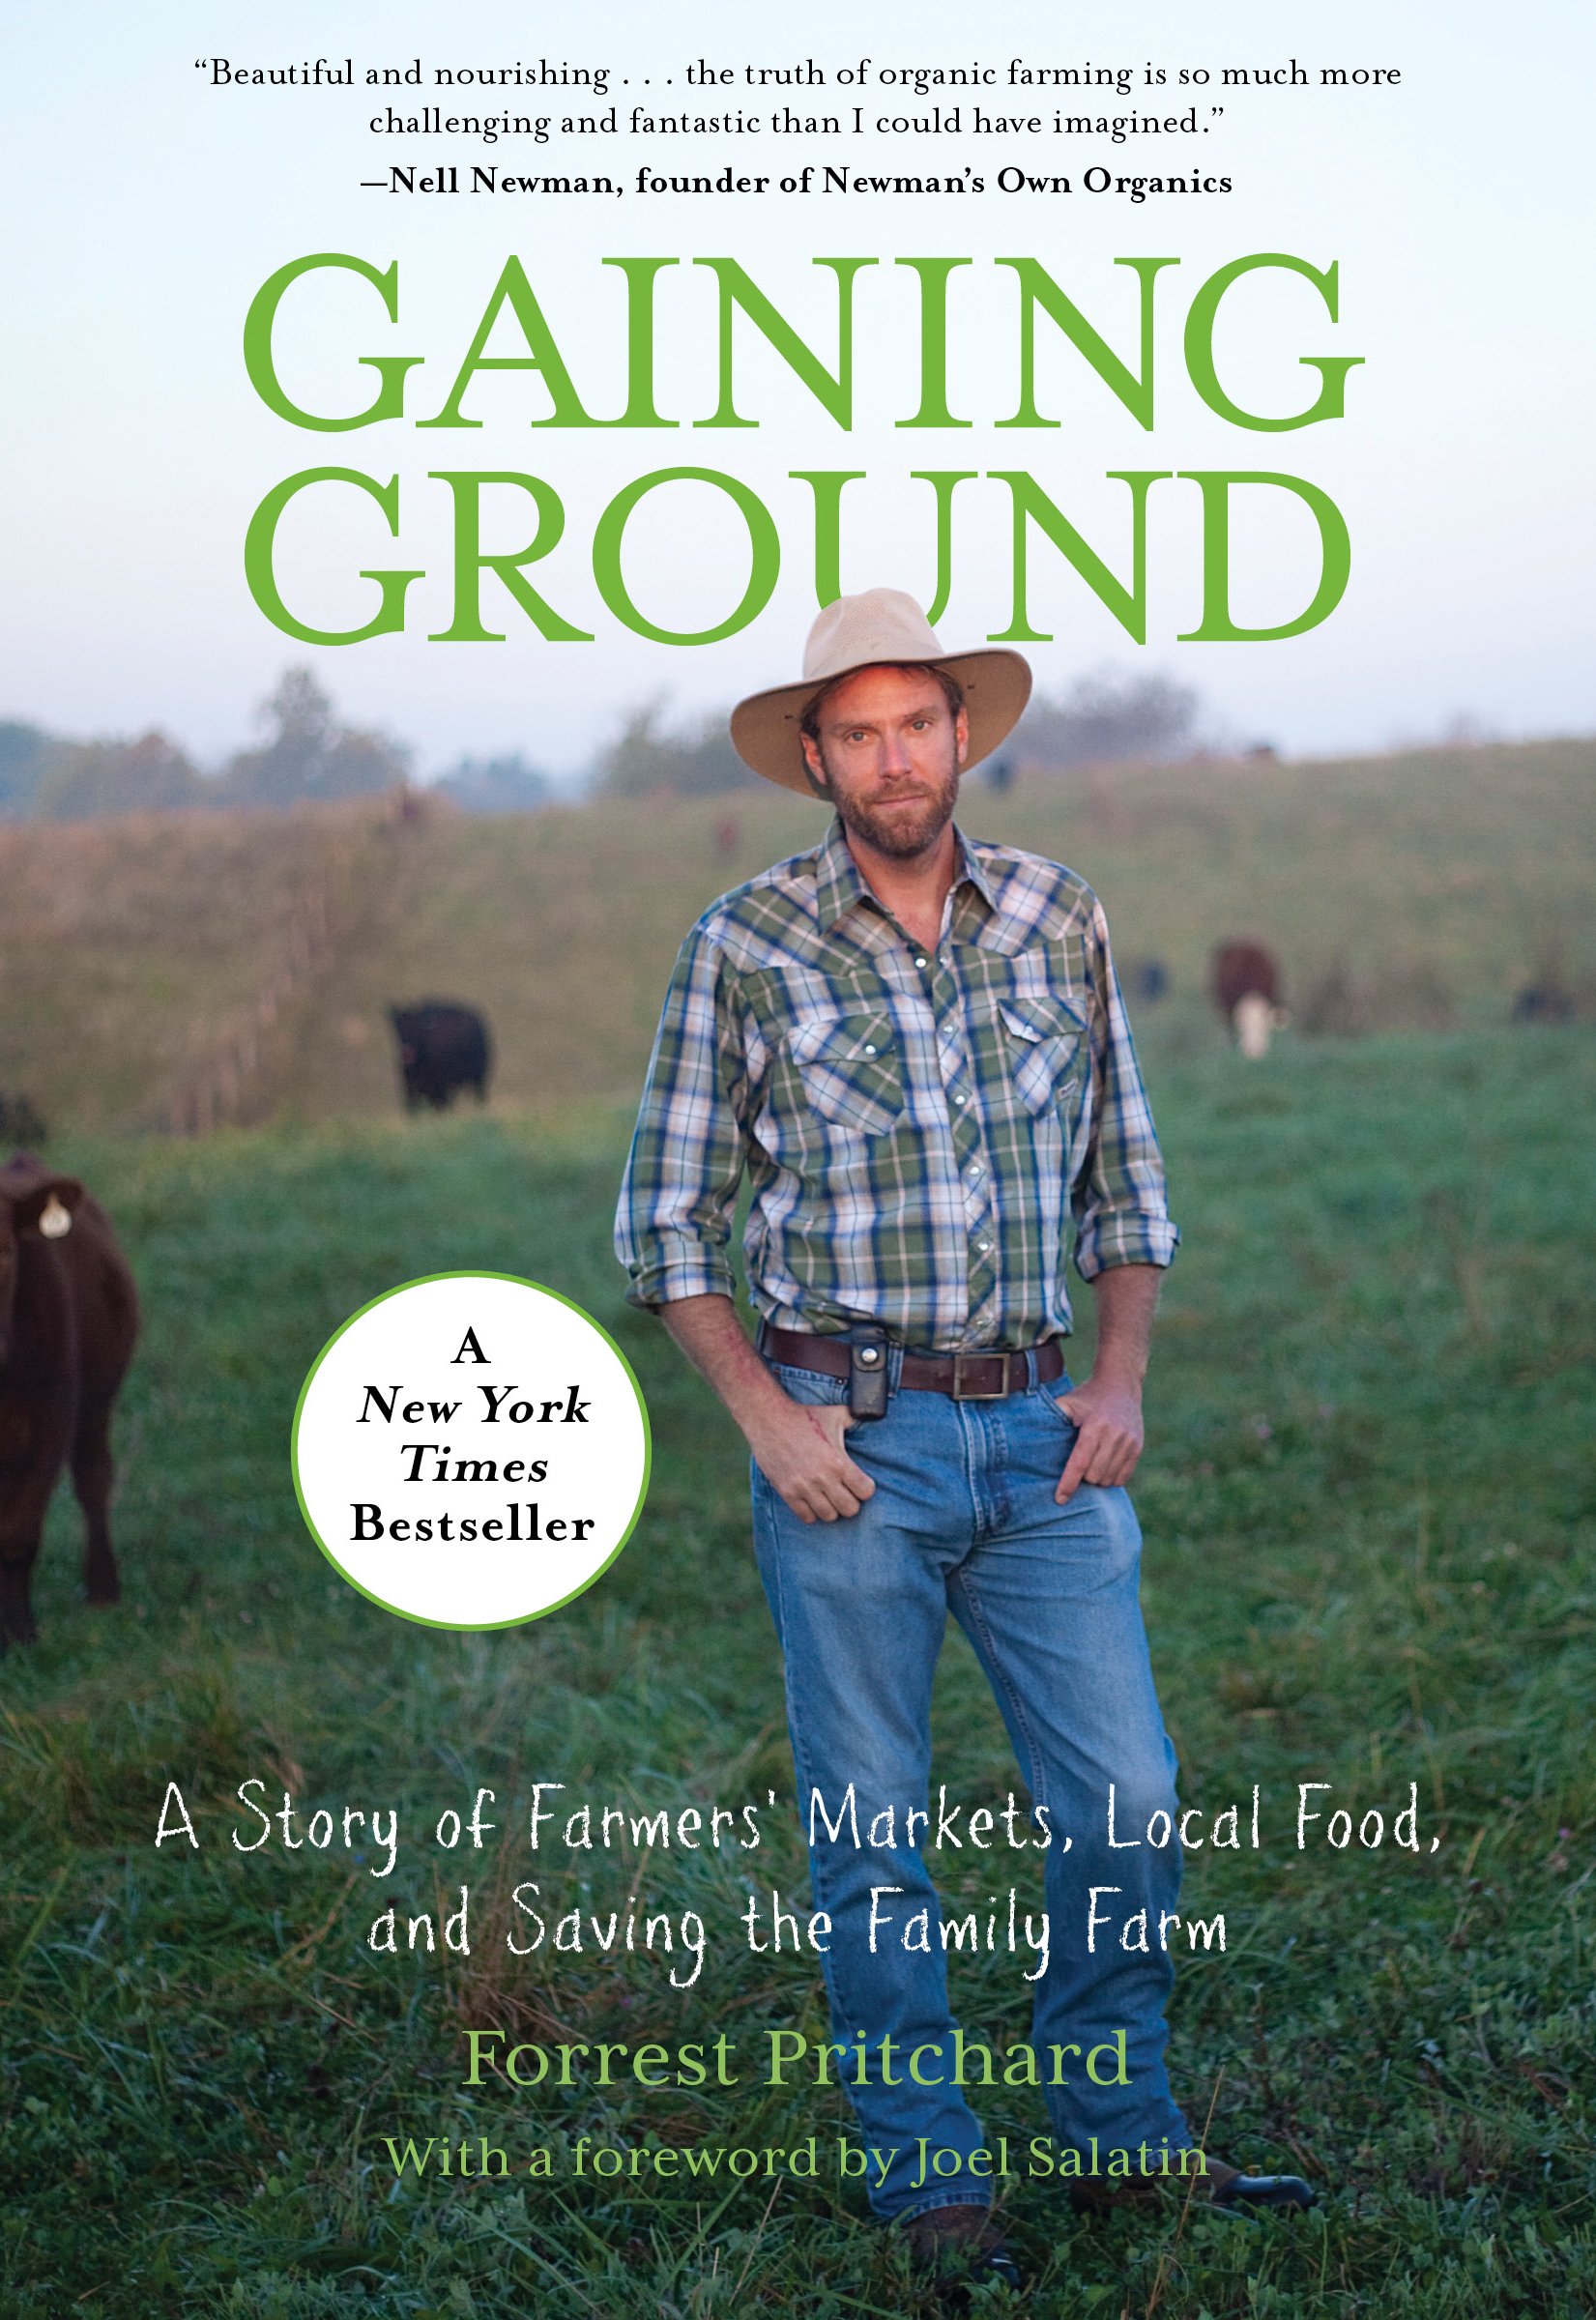 A book about local farms and community